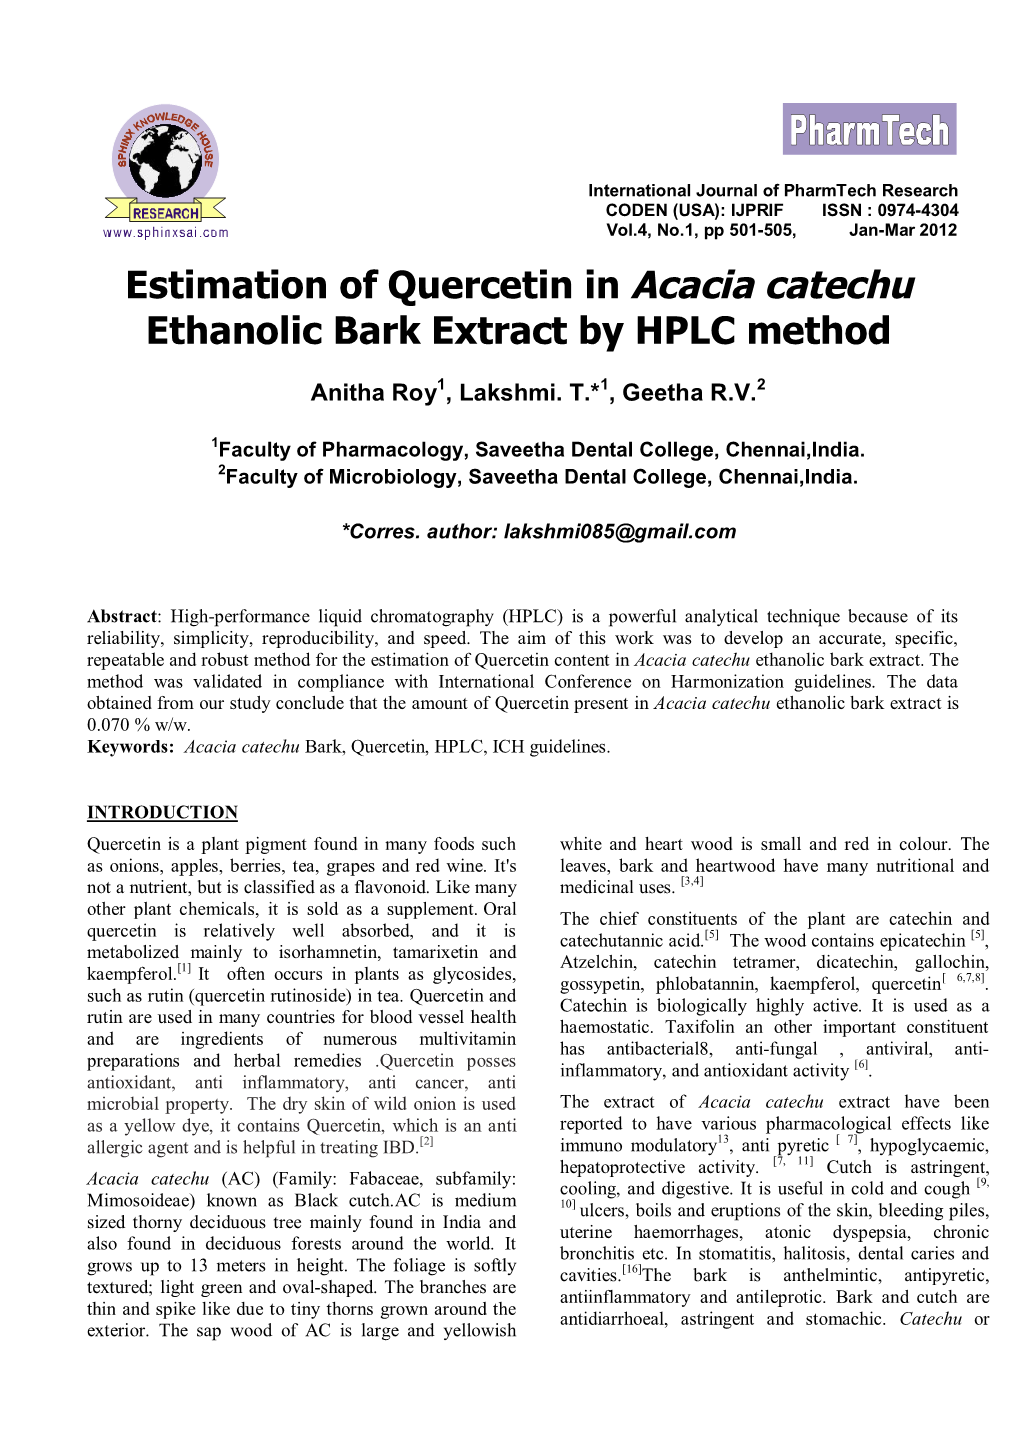 Estimation of Quercetin in Acacia Catechu Ethanolic Bark Extract by HPLC Method